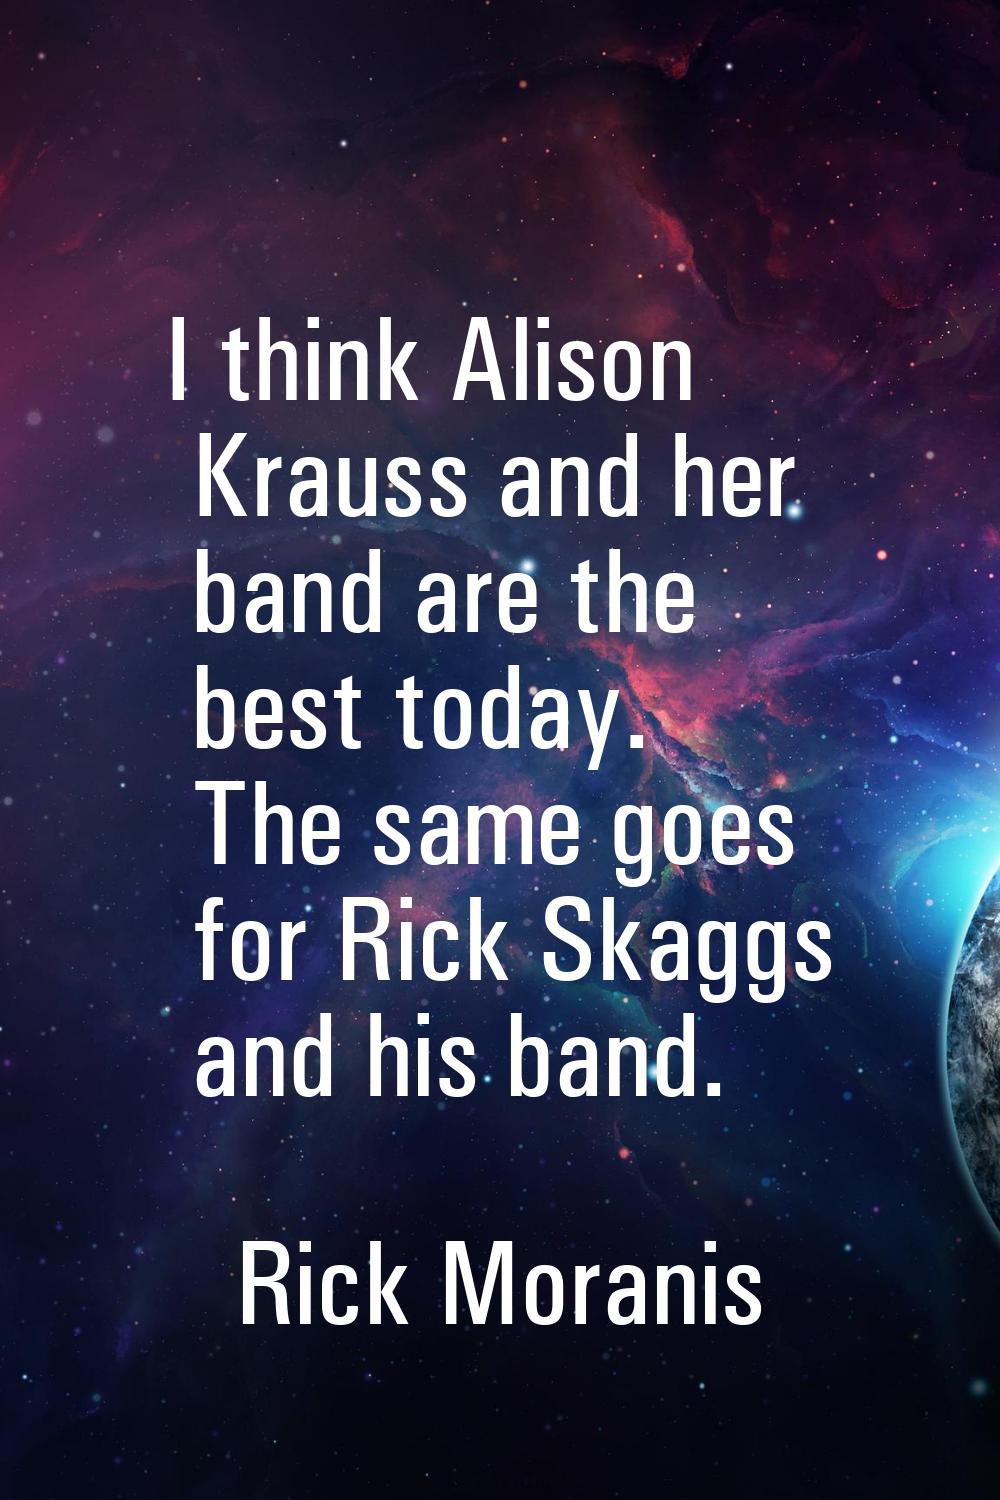 I think Alison Krauss and her band are the best today. The same goes for Rick Skaggs and his band.